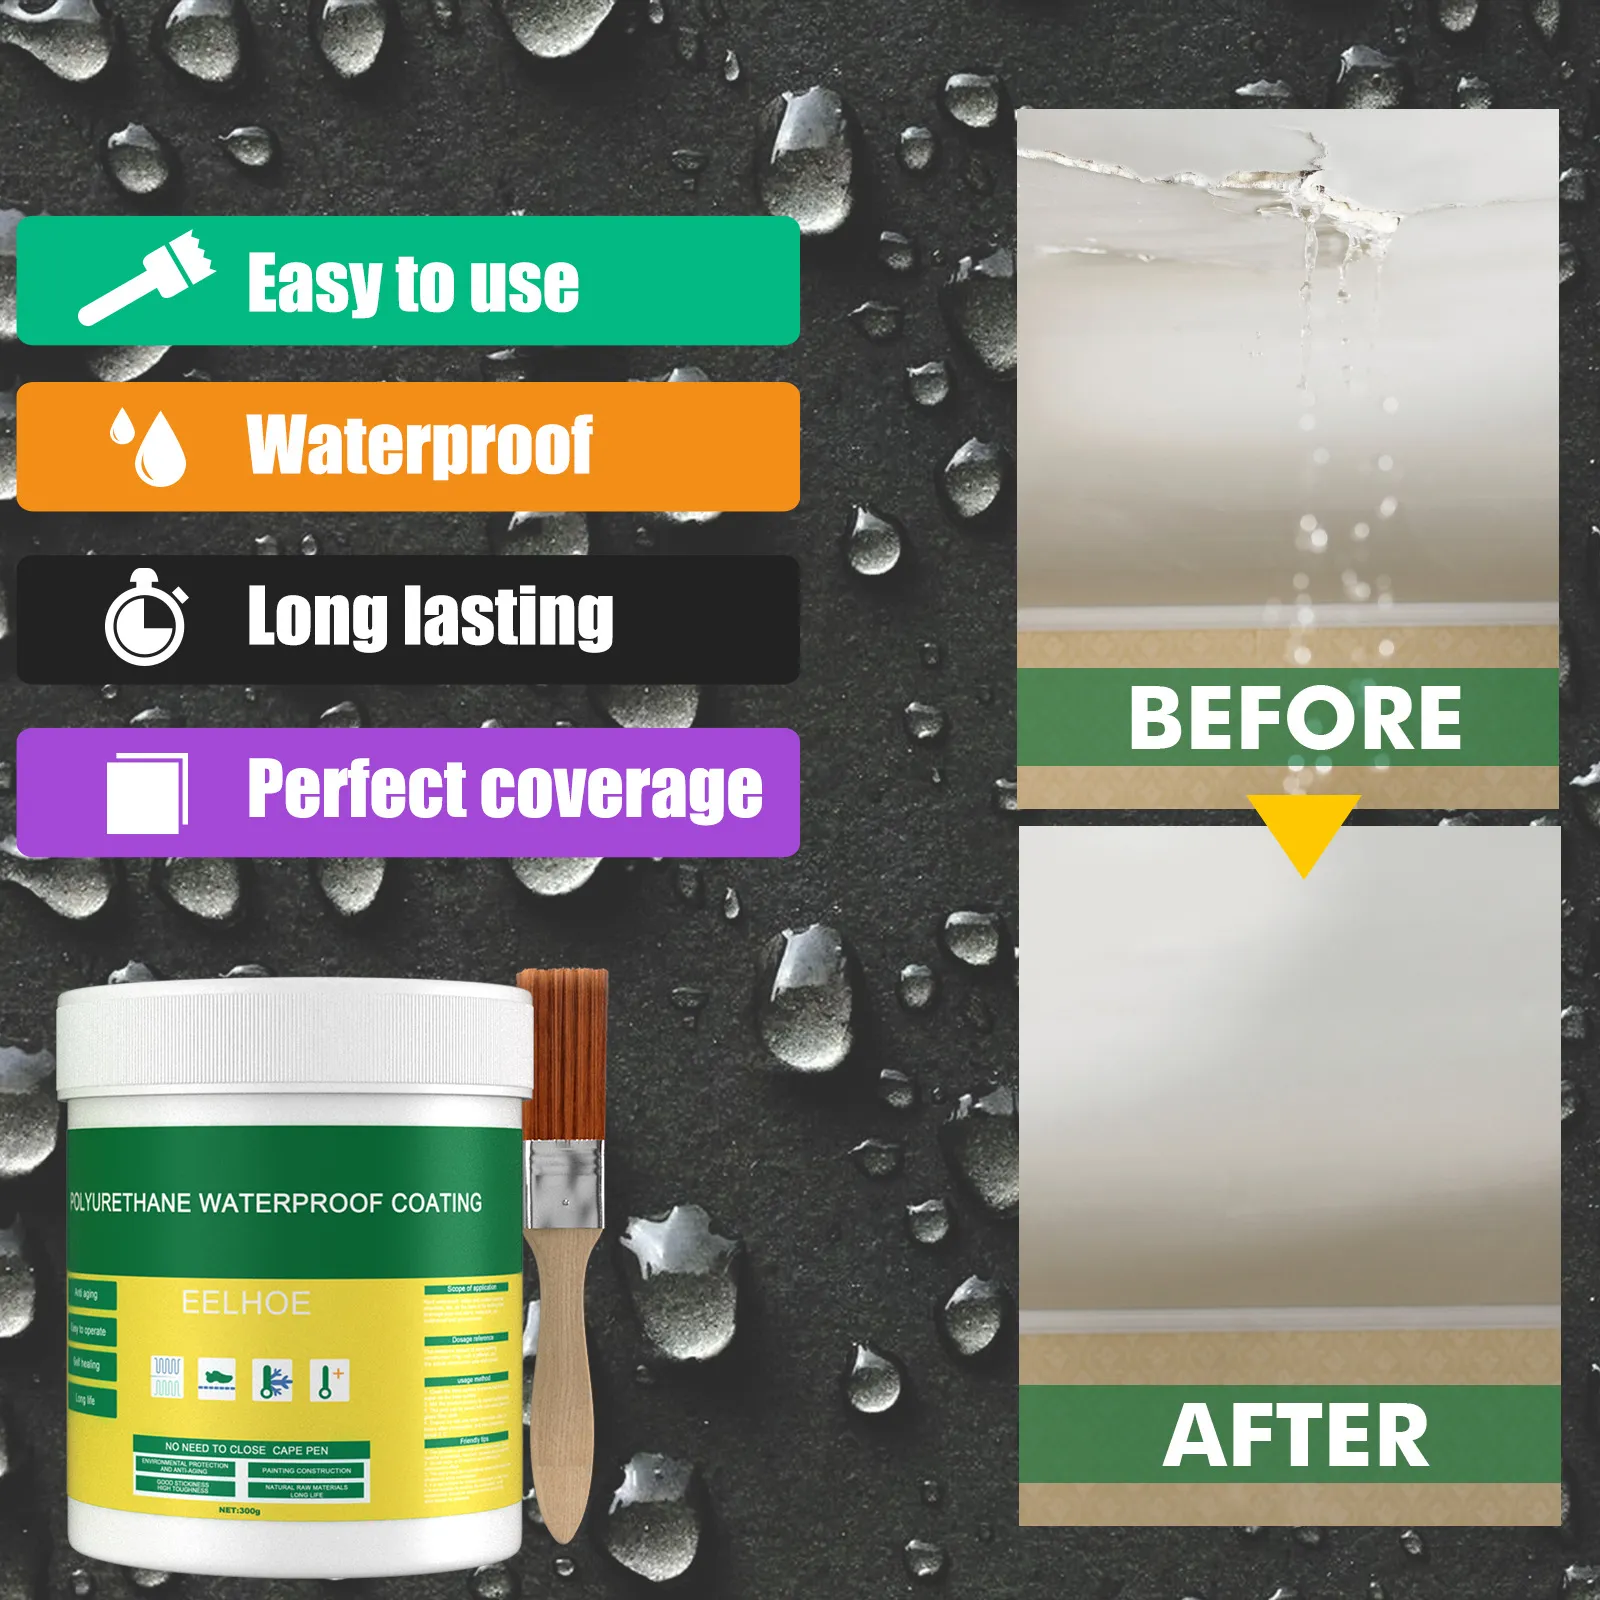 100g Waterproof Coating Sealant Agent Transparent Glue Invisible Paste Glue  With Brush Adhesive Repair Tool Home Roof Bathroom